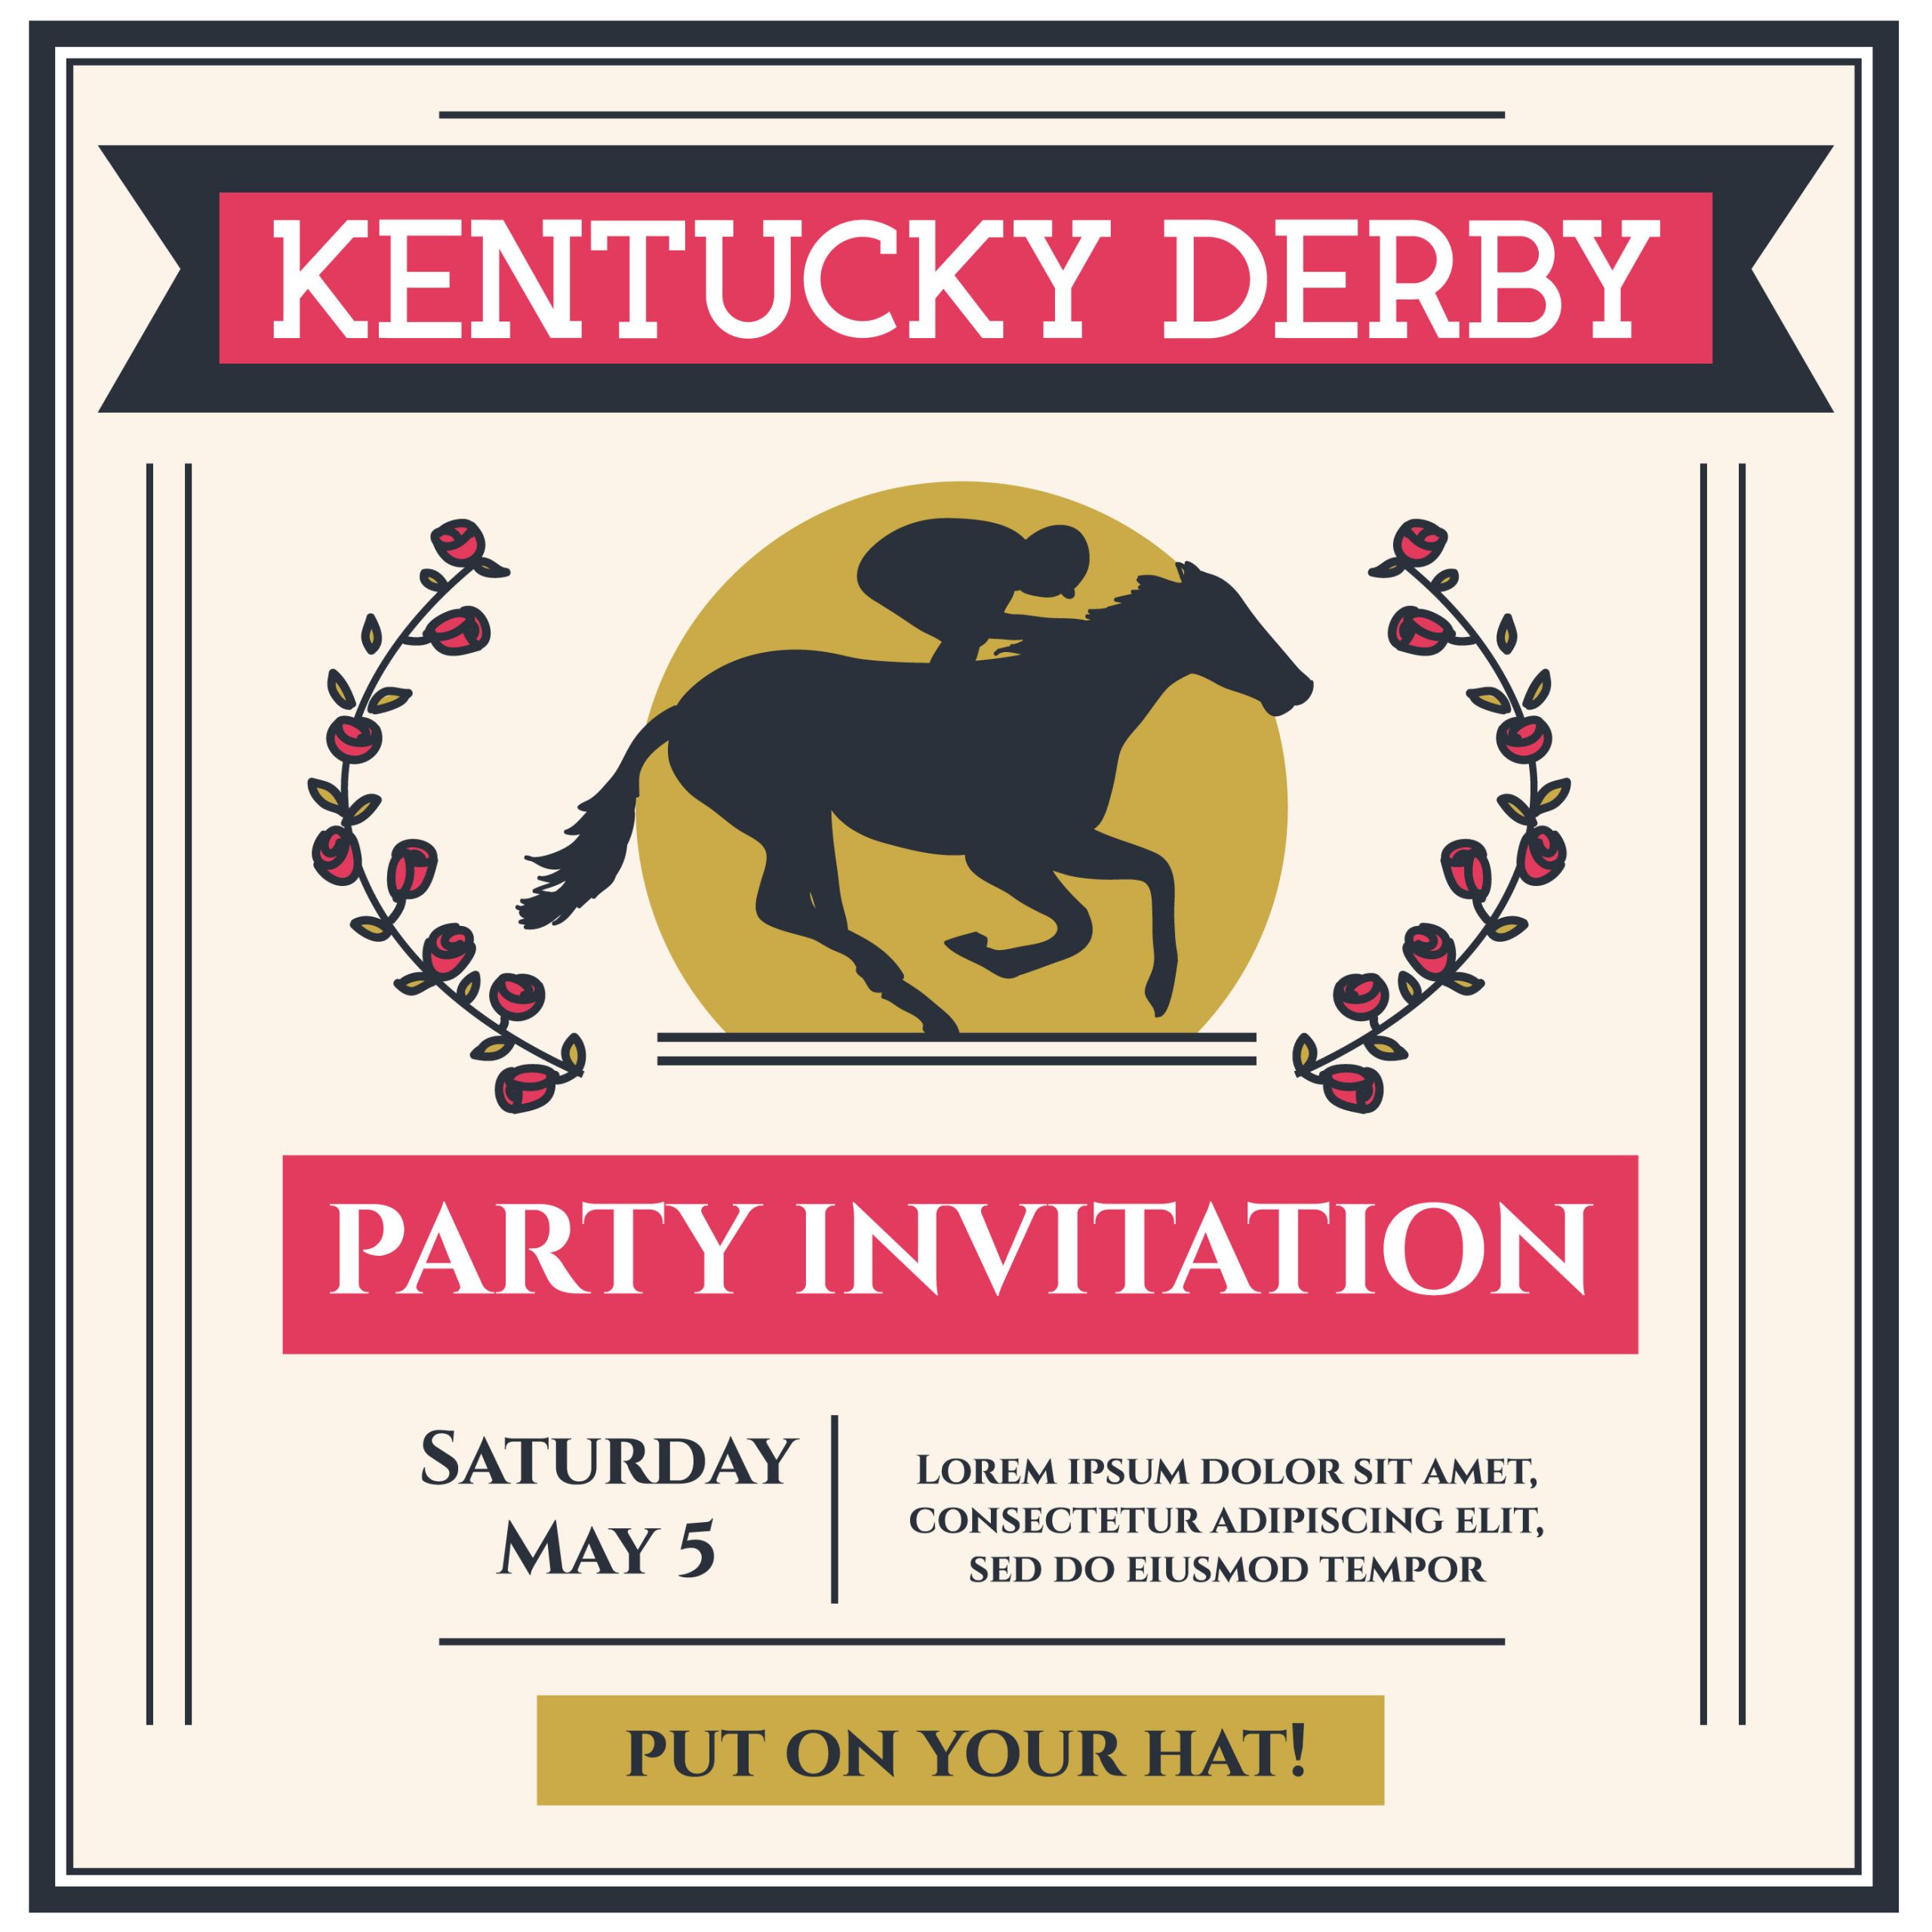 Kentucky Derby Party Invitation Template Kentucky Derby Party Invitation Vector Download Free